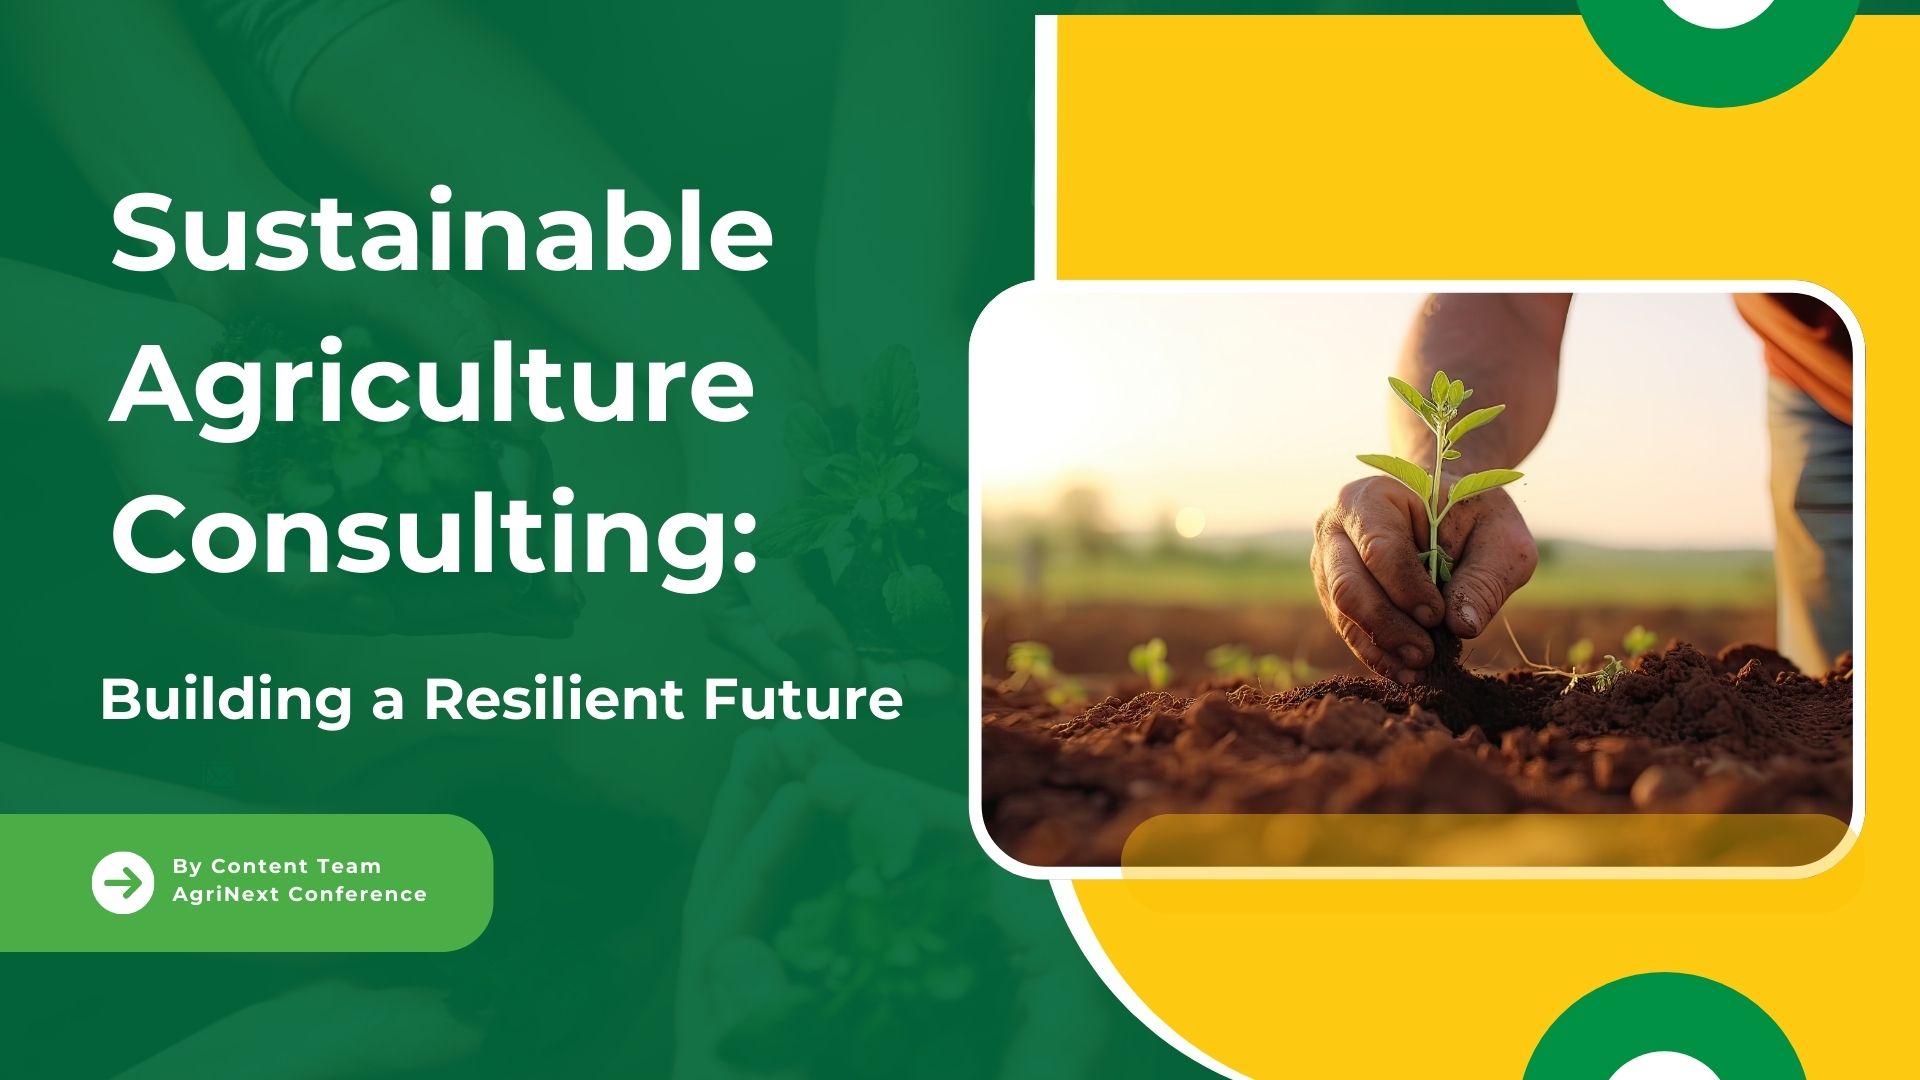 Sustainable Agriculture Consulting: Building a Resilient Future